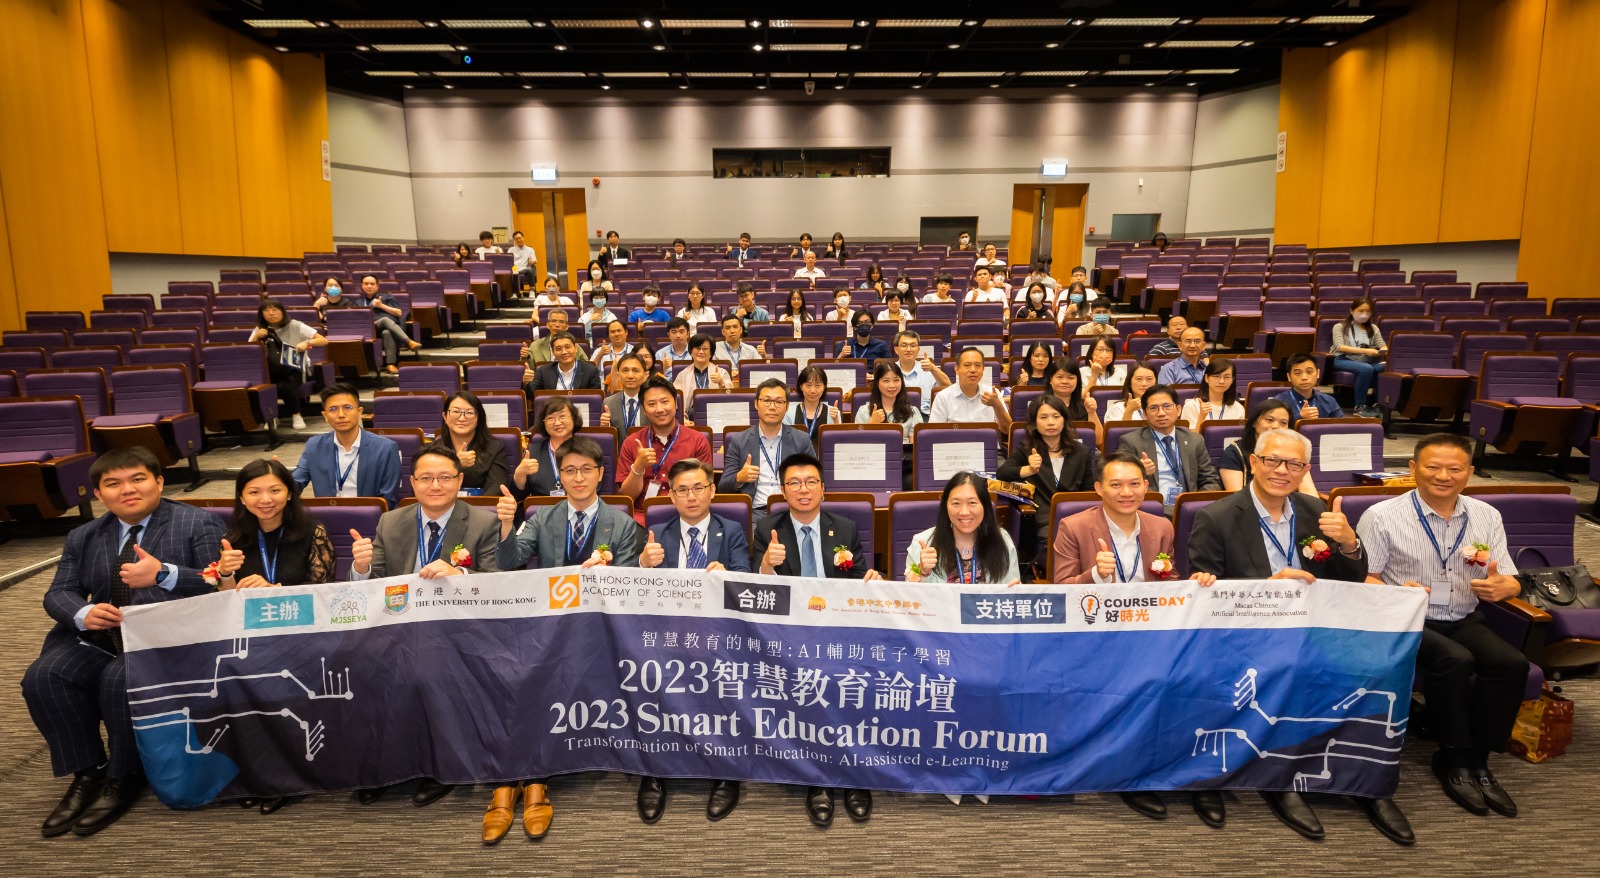 Prof. Cecilia Chan presented at the '2023 Smart Education Forum' at HKU